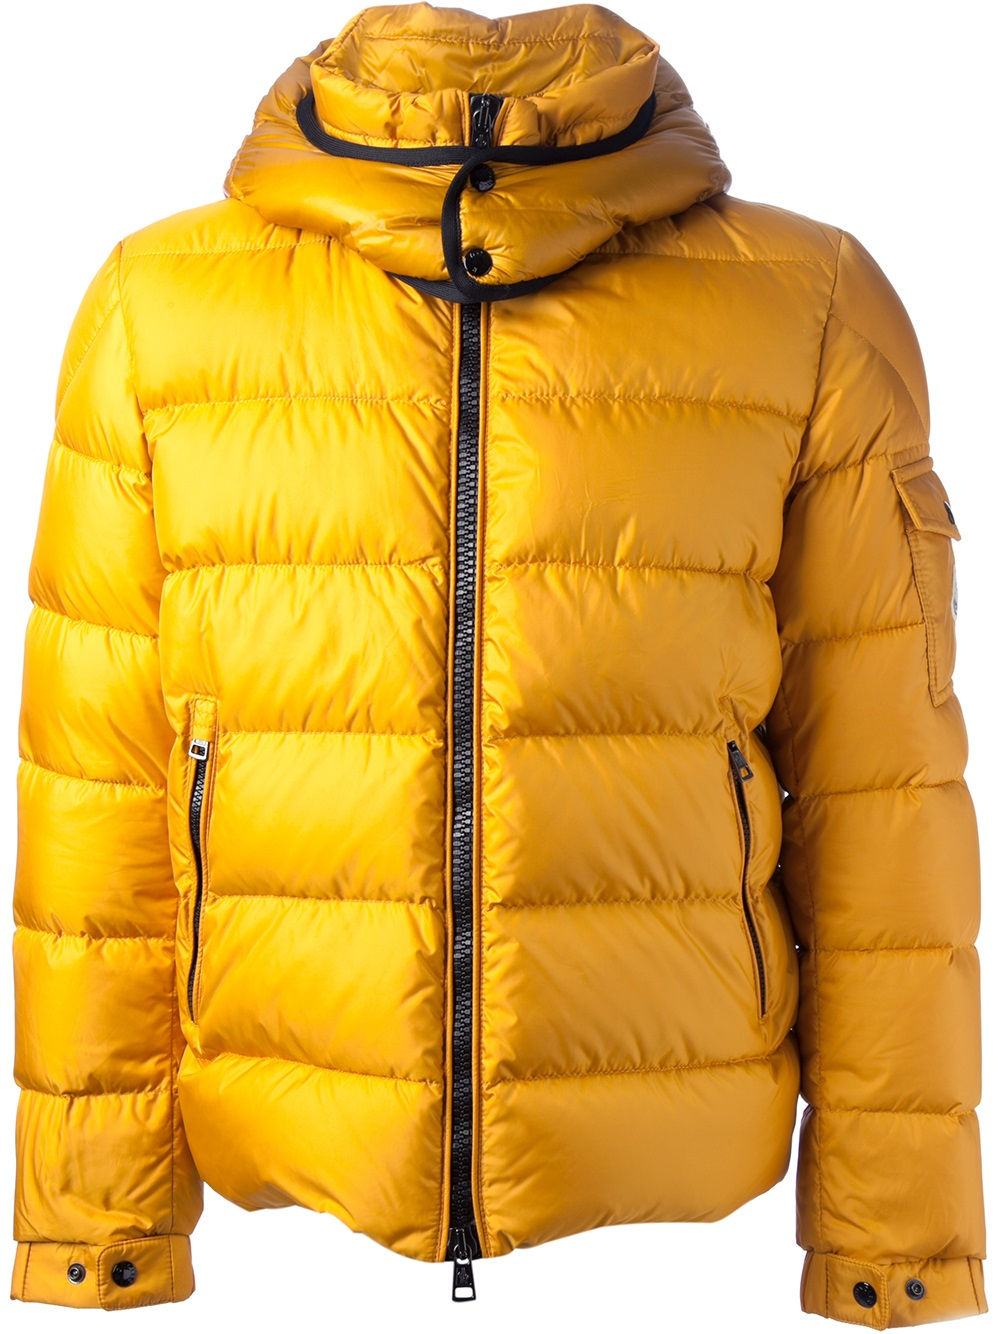 Moncler Hymalay Padded Jacket in Yellow for Men - Lyst